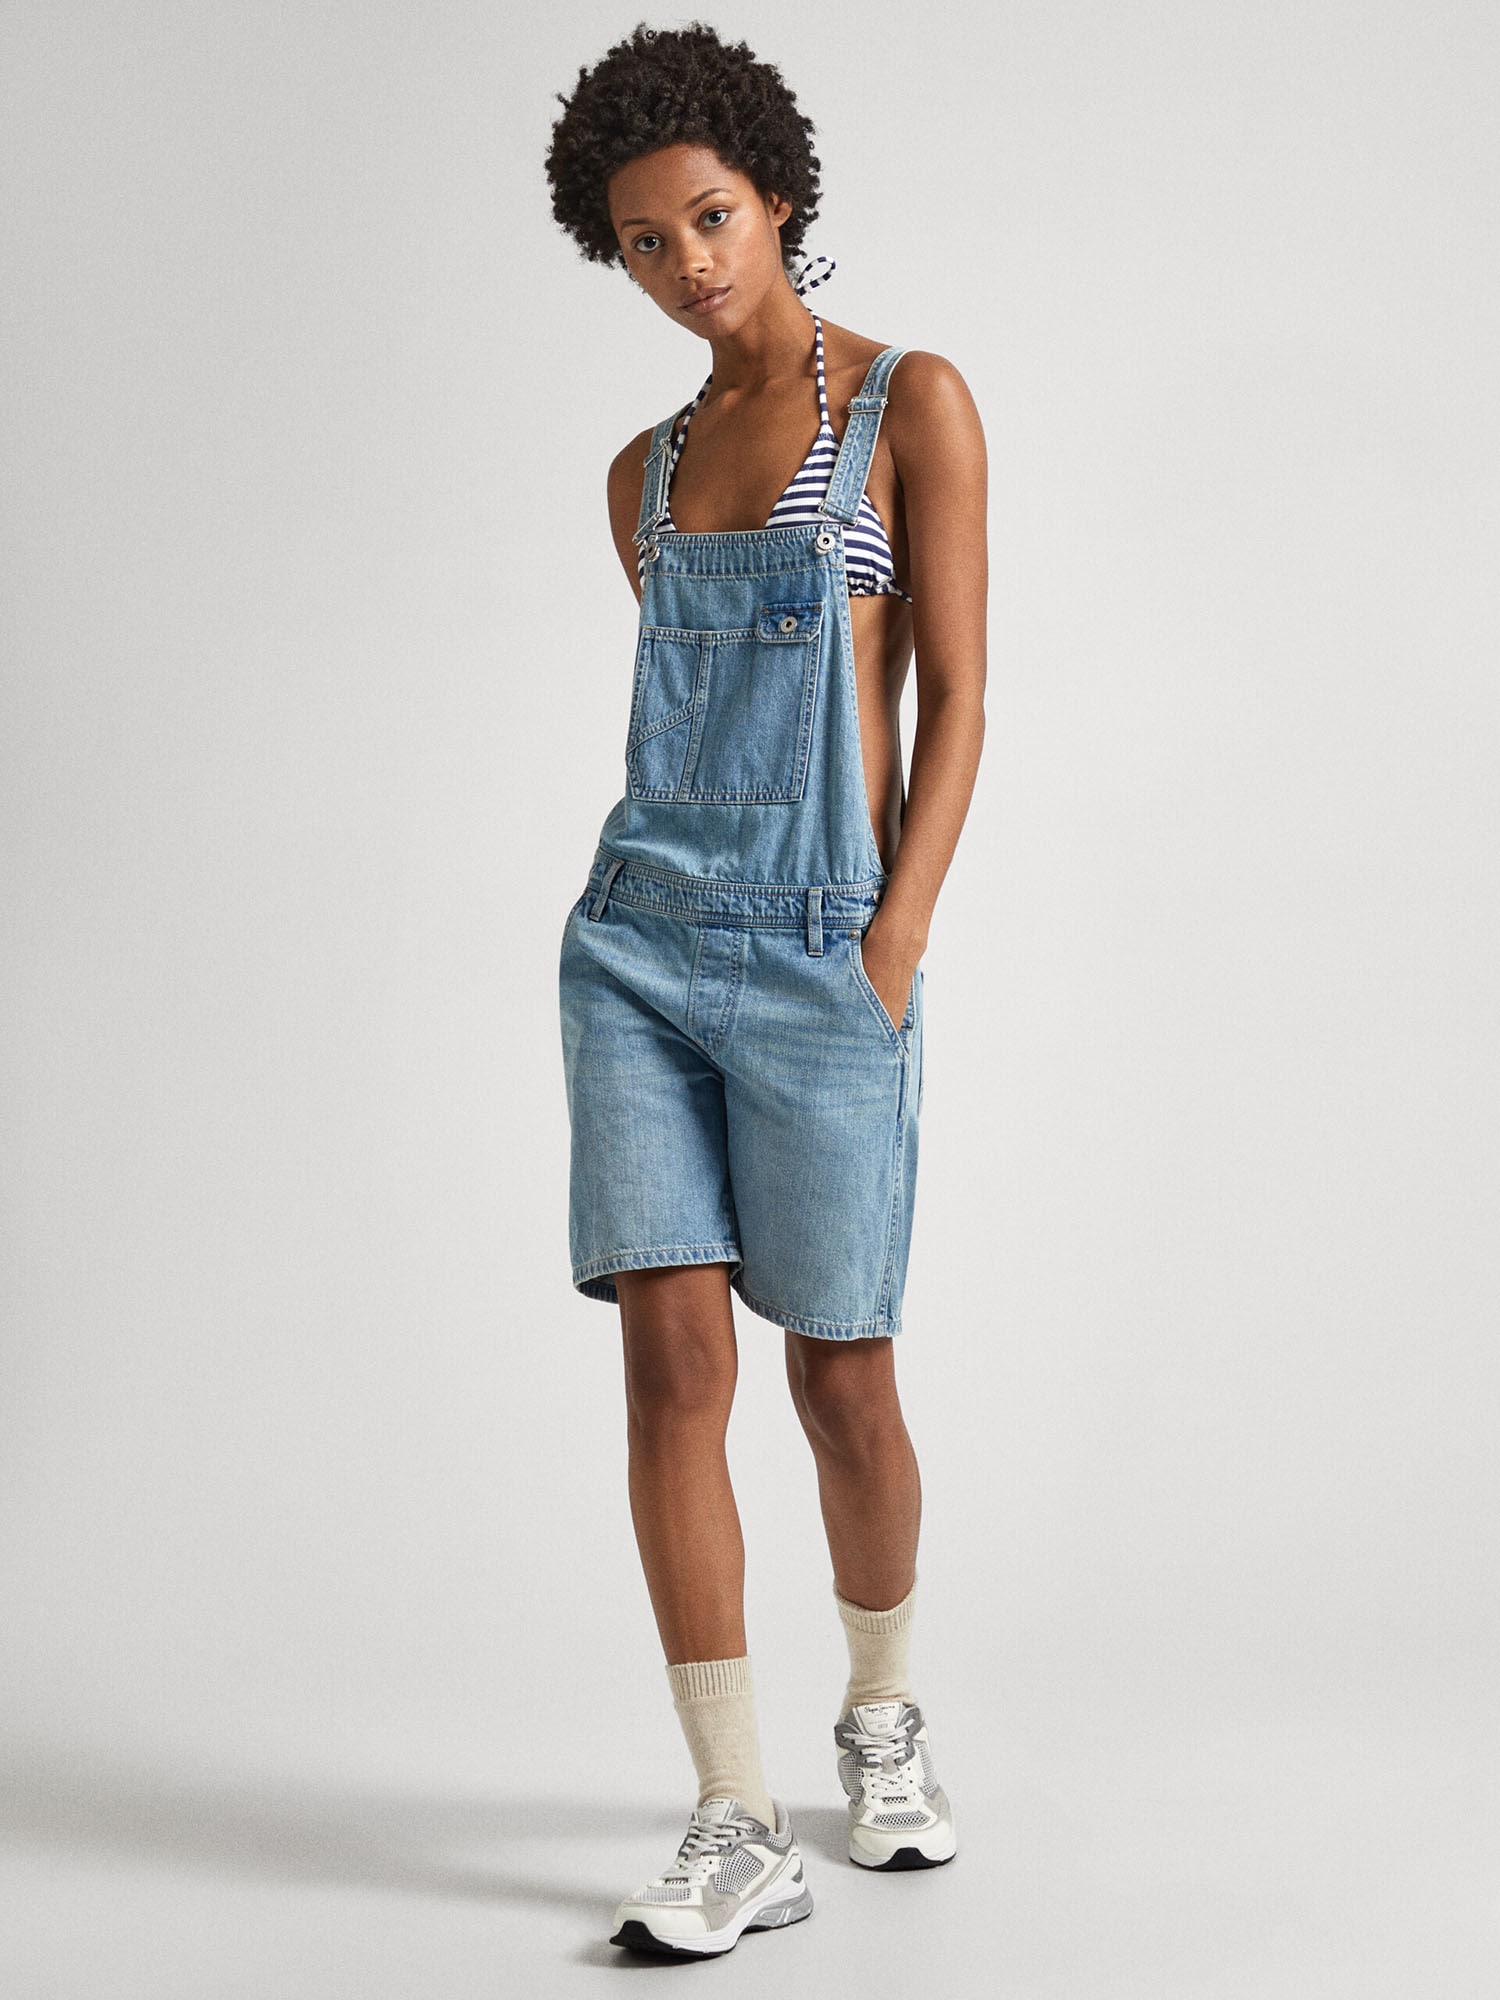 Jumpsuit 'ABBY FABBY' von Pepe Jeans